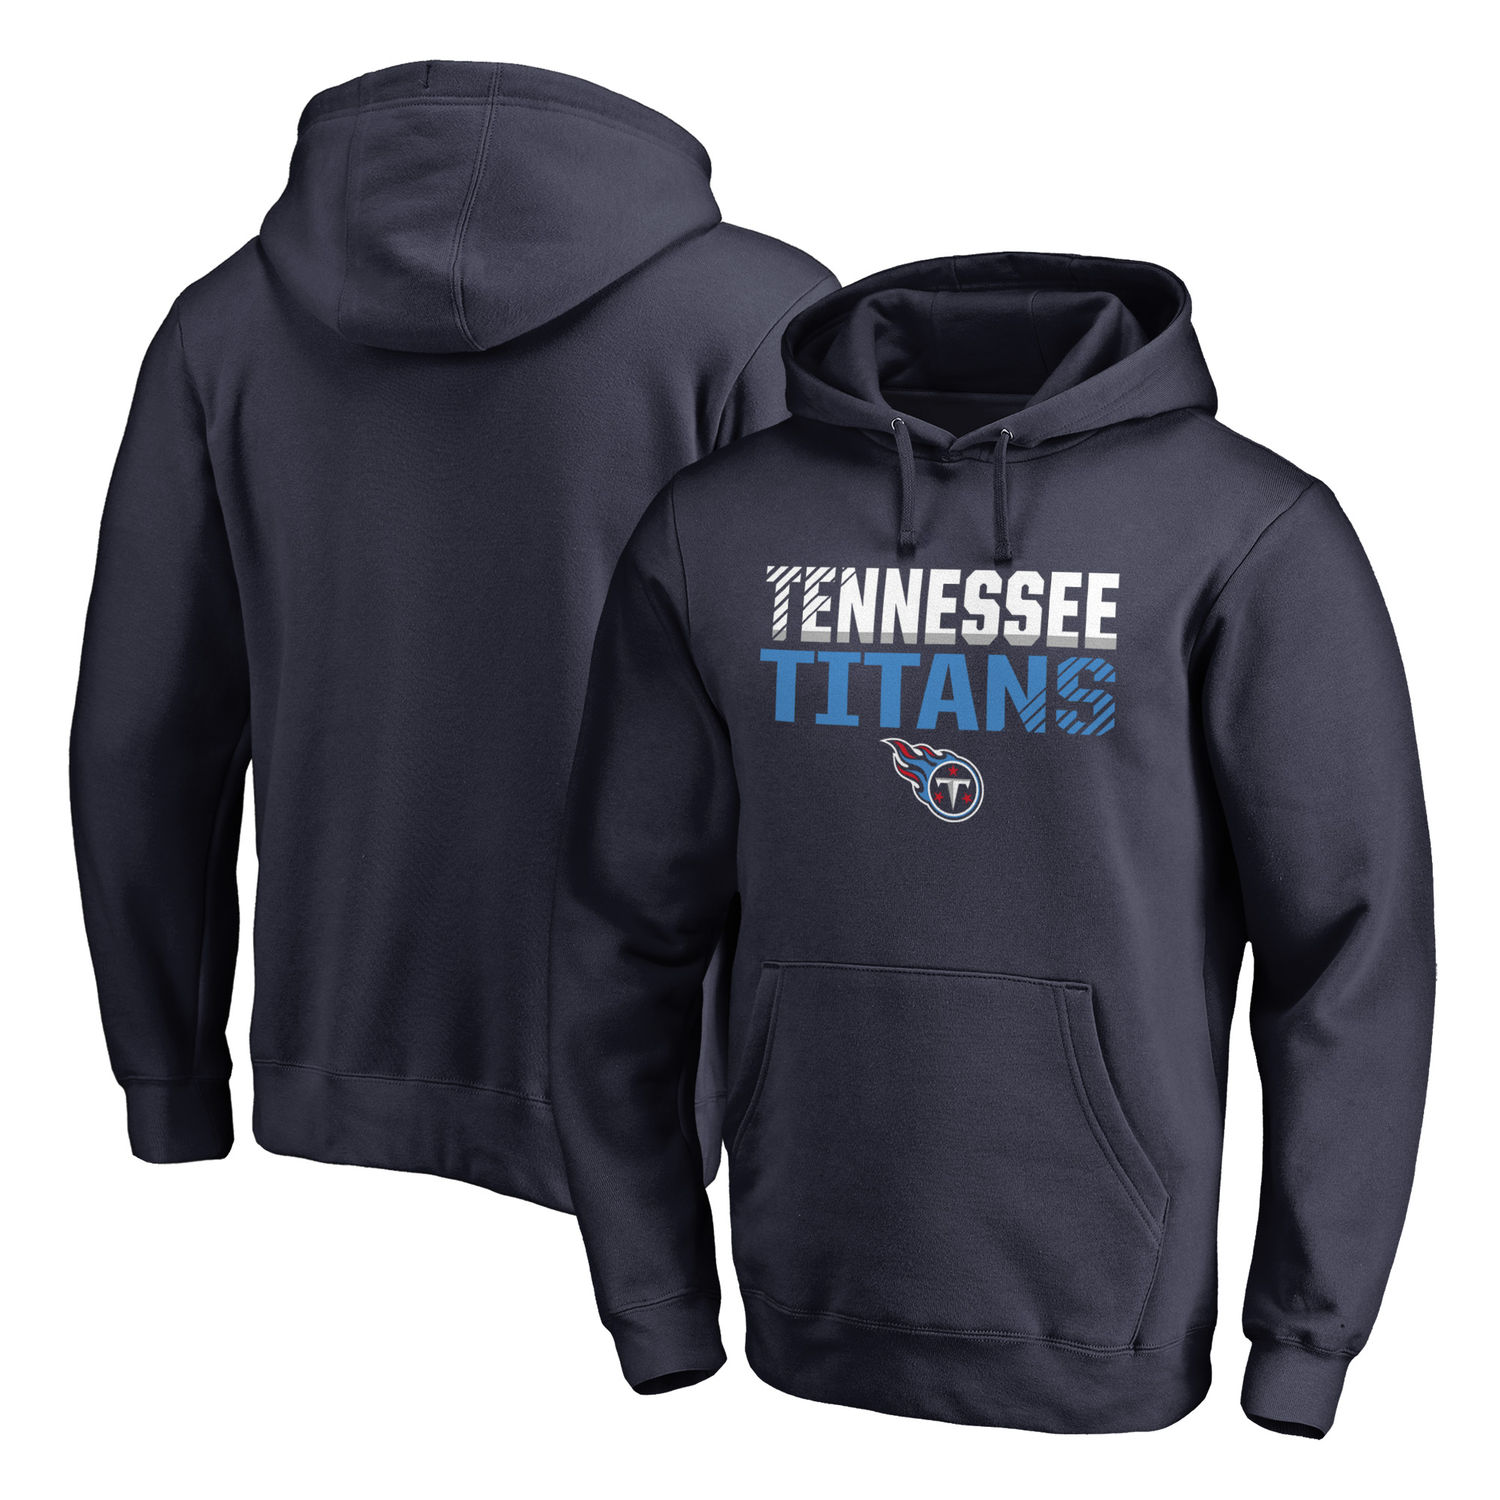 Men's Tennessee Titans NFL Pro Line by Fanatics Branded Navy Iconic Collection Fade Out Pullover Hoodie